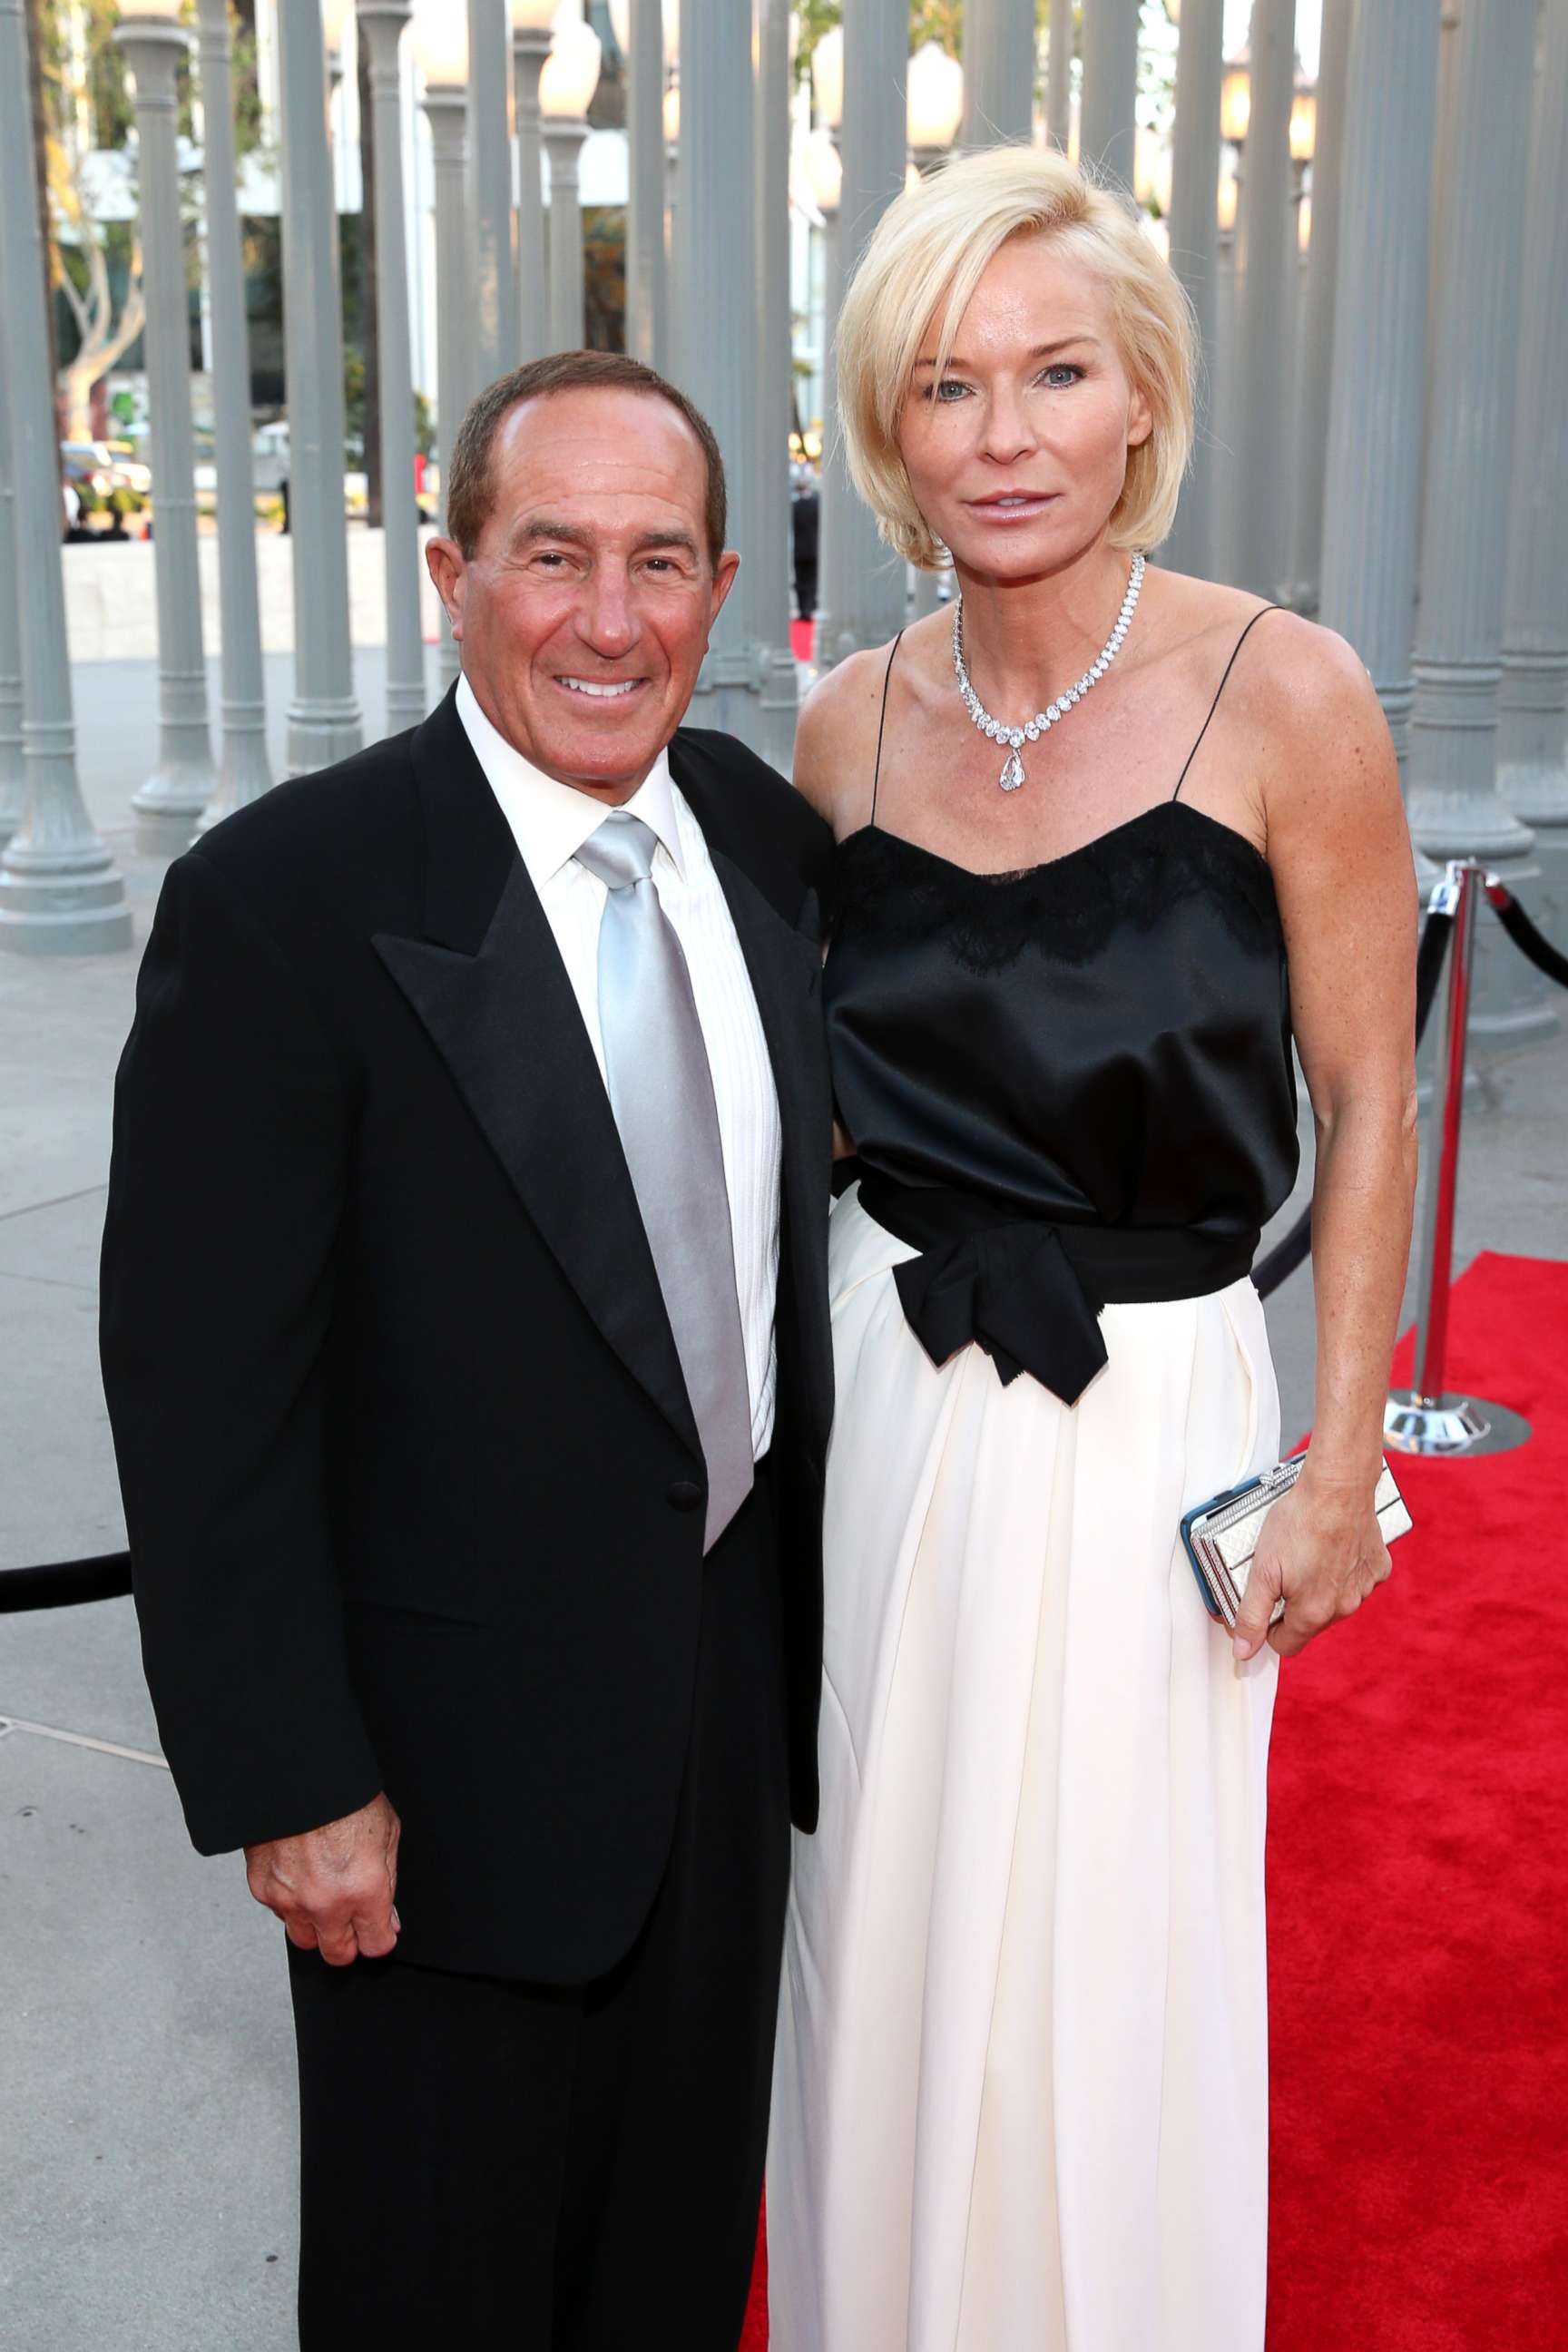 PHOTO: Geoffrey Palmer and Anne Palmer attend the LACMA 50th Anniversary Gala sponsored by Christie's at LACMA on April 18, 2015 in Los Angeles, California.